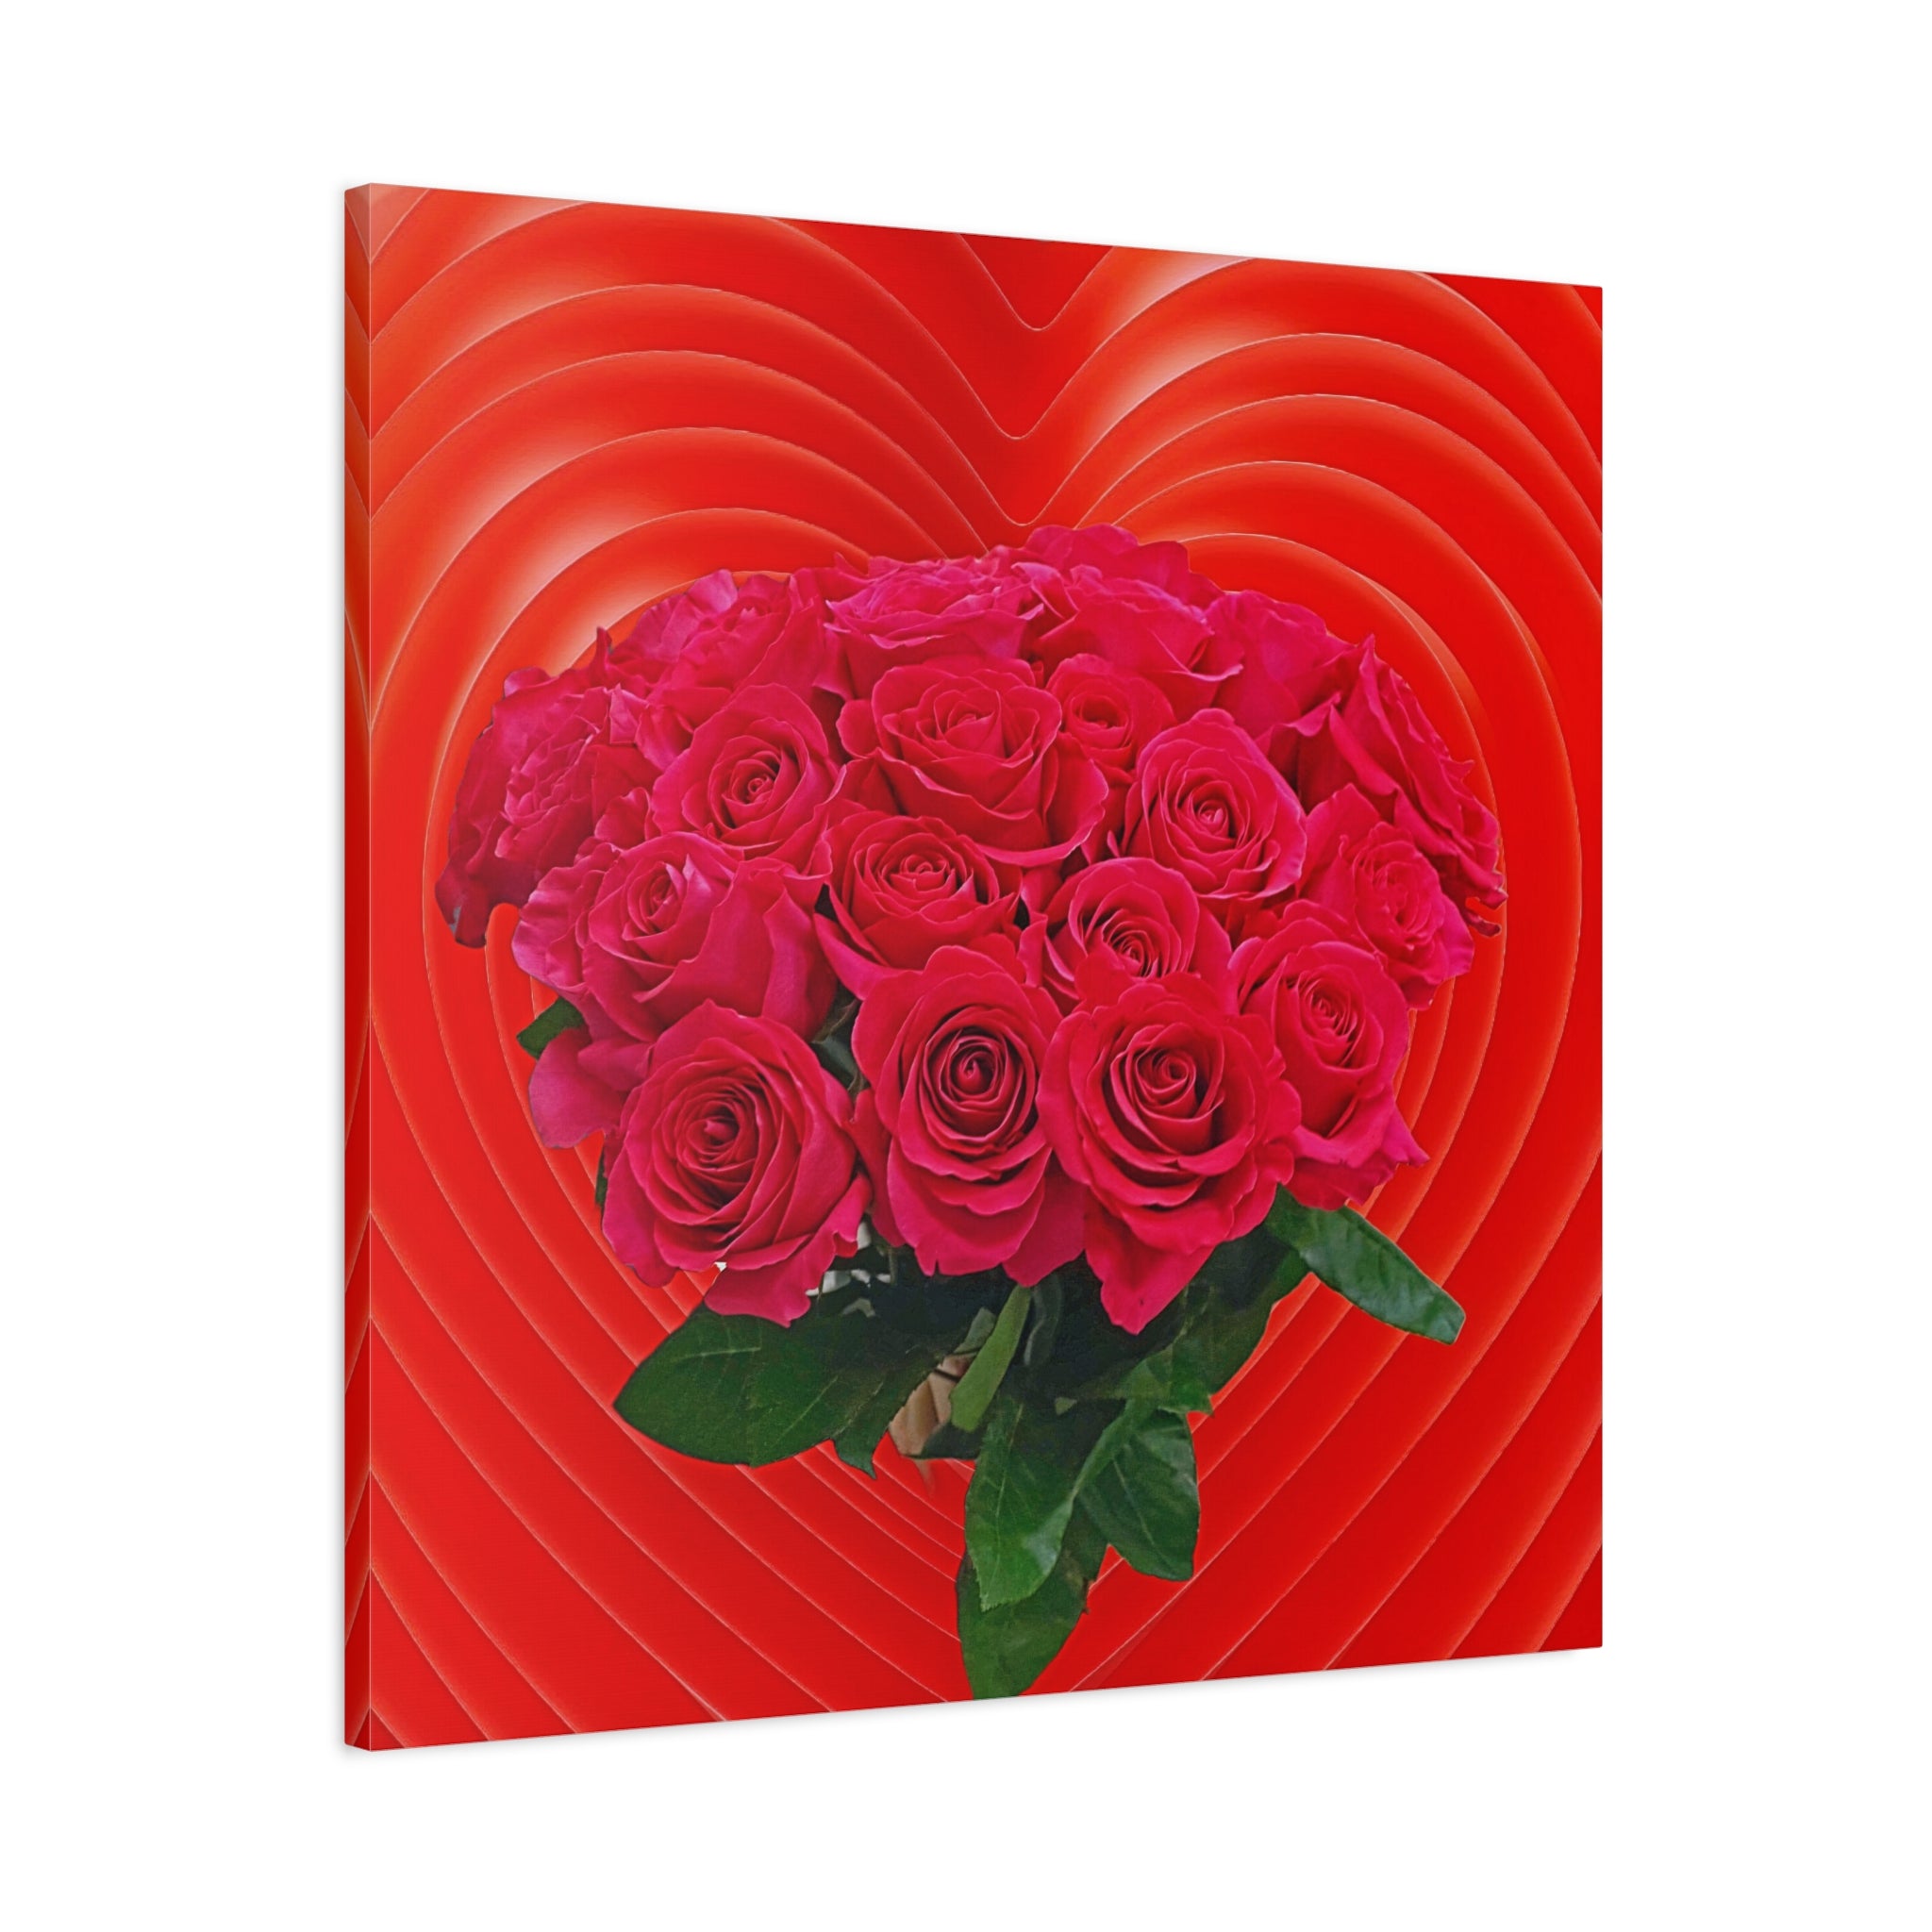 Wall Art LOVE ROSES BOUQUET Canvas Print Painting Original Giclee 32X32 GW Love Nice Beauty Fun Design Fit Hot House Home Office Gift Ready To Hang Living